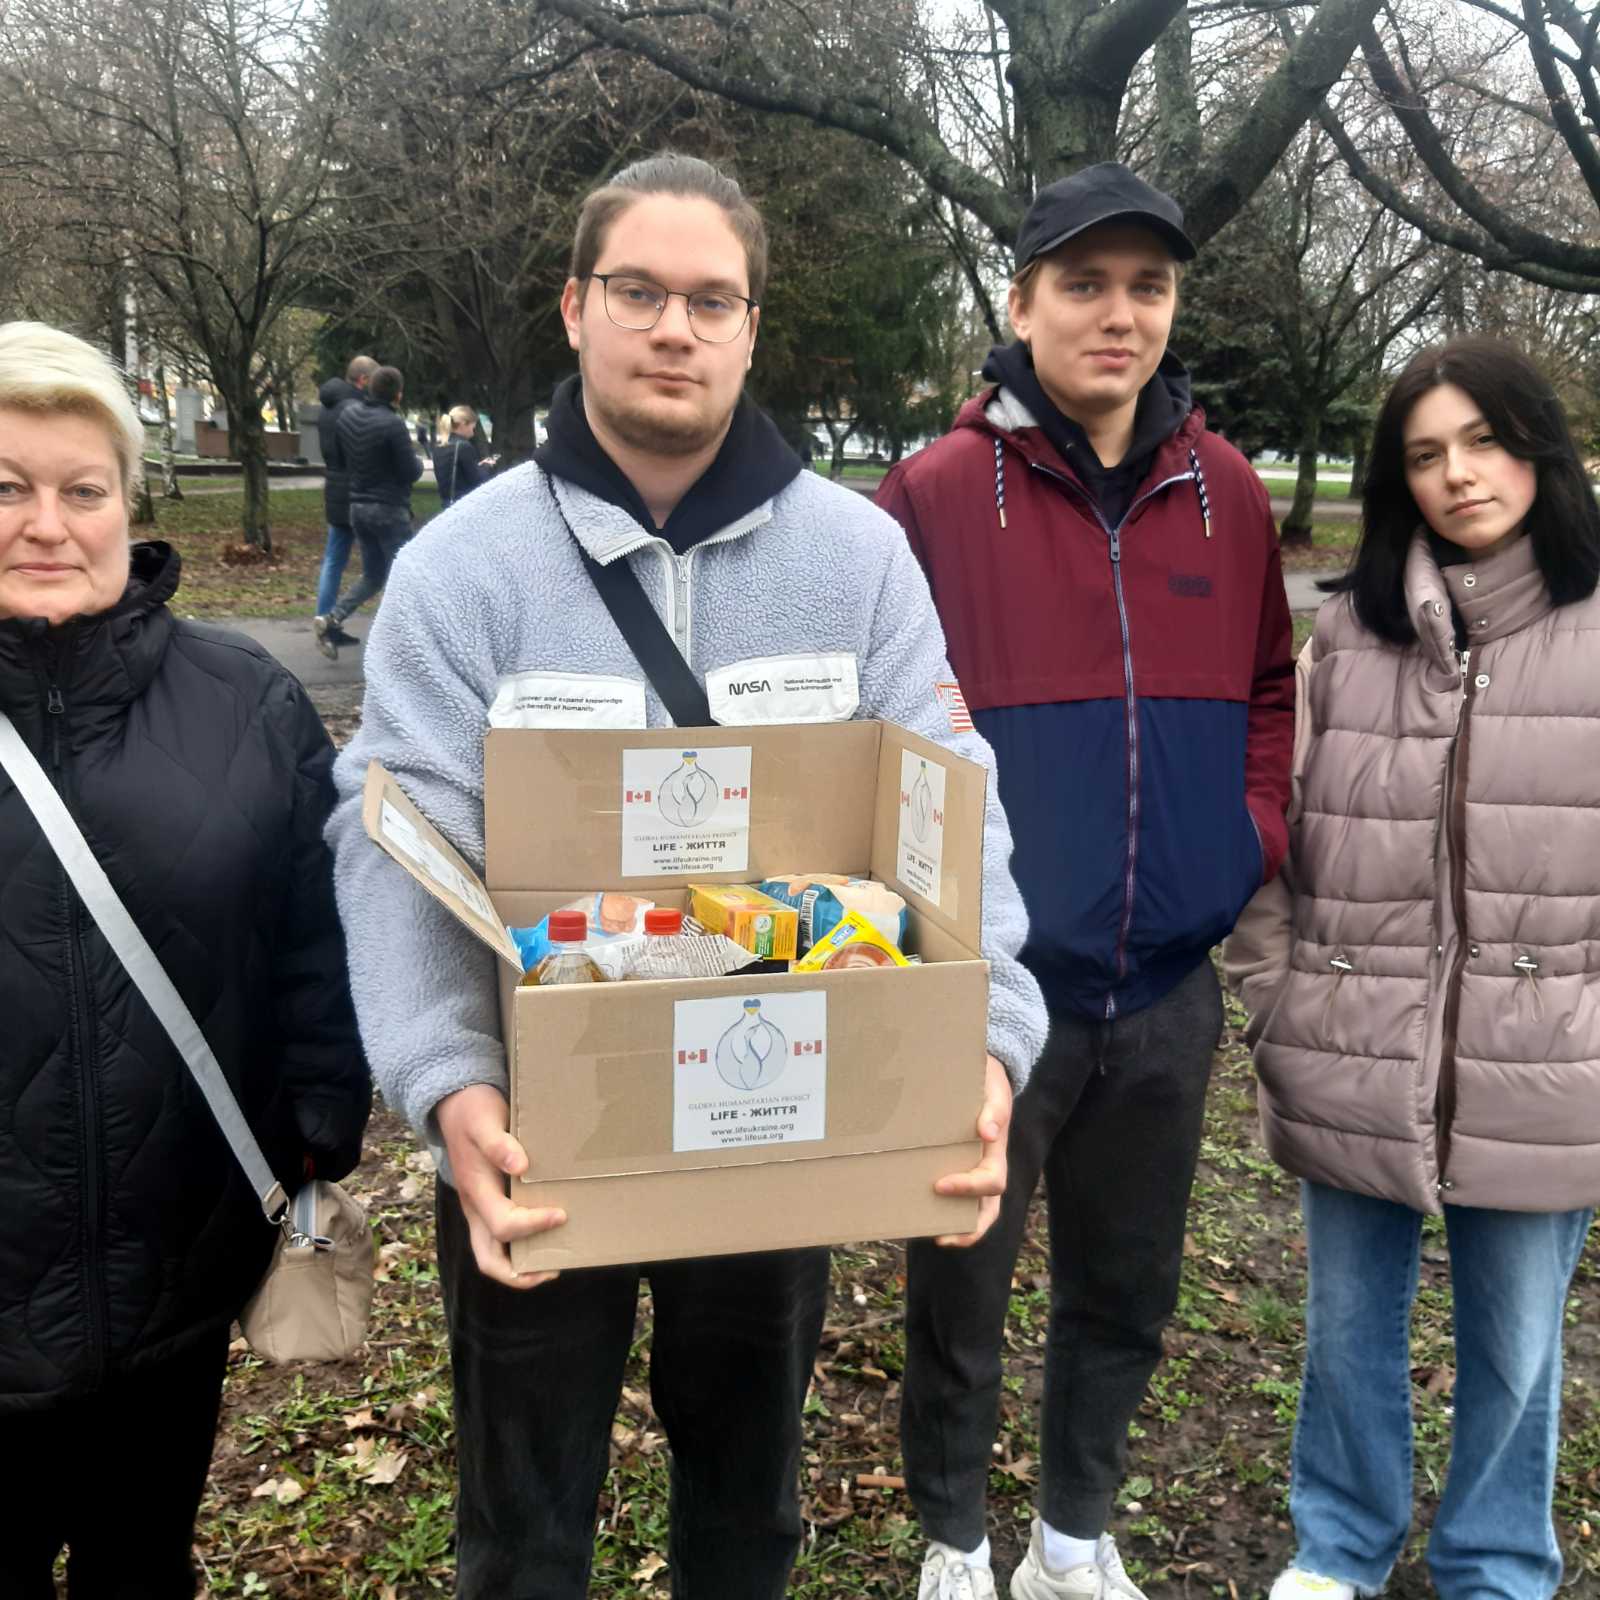 Helping Ukrainians in need every day